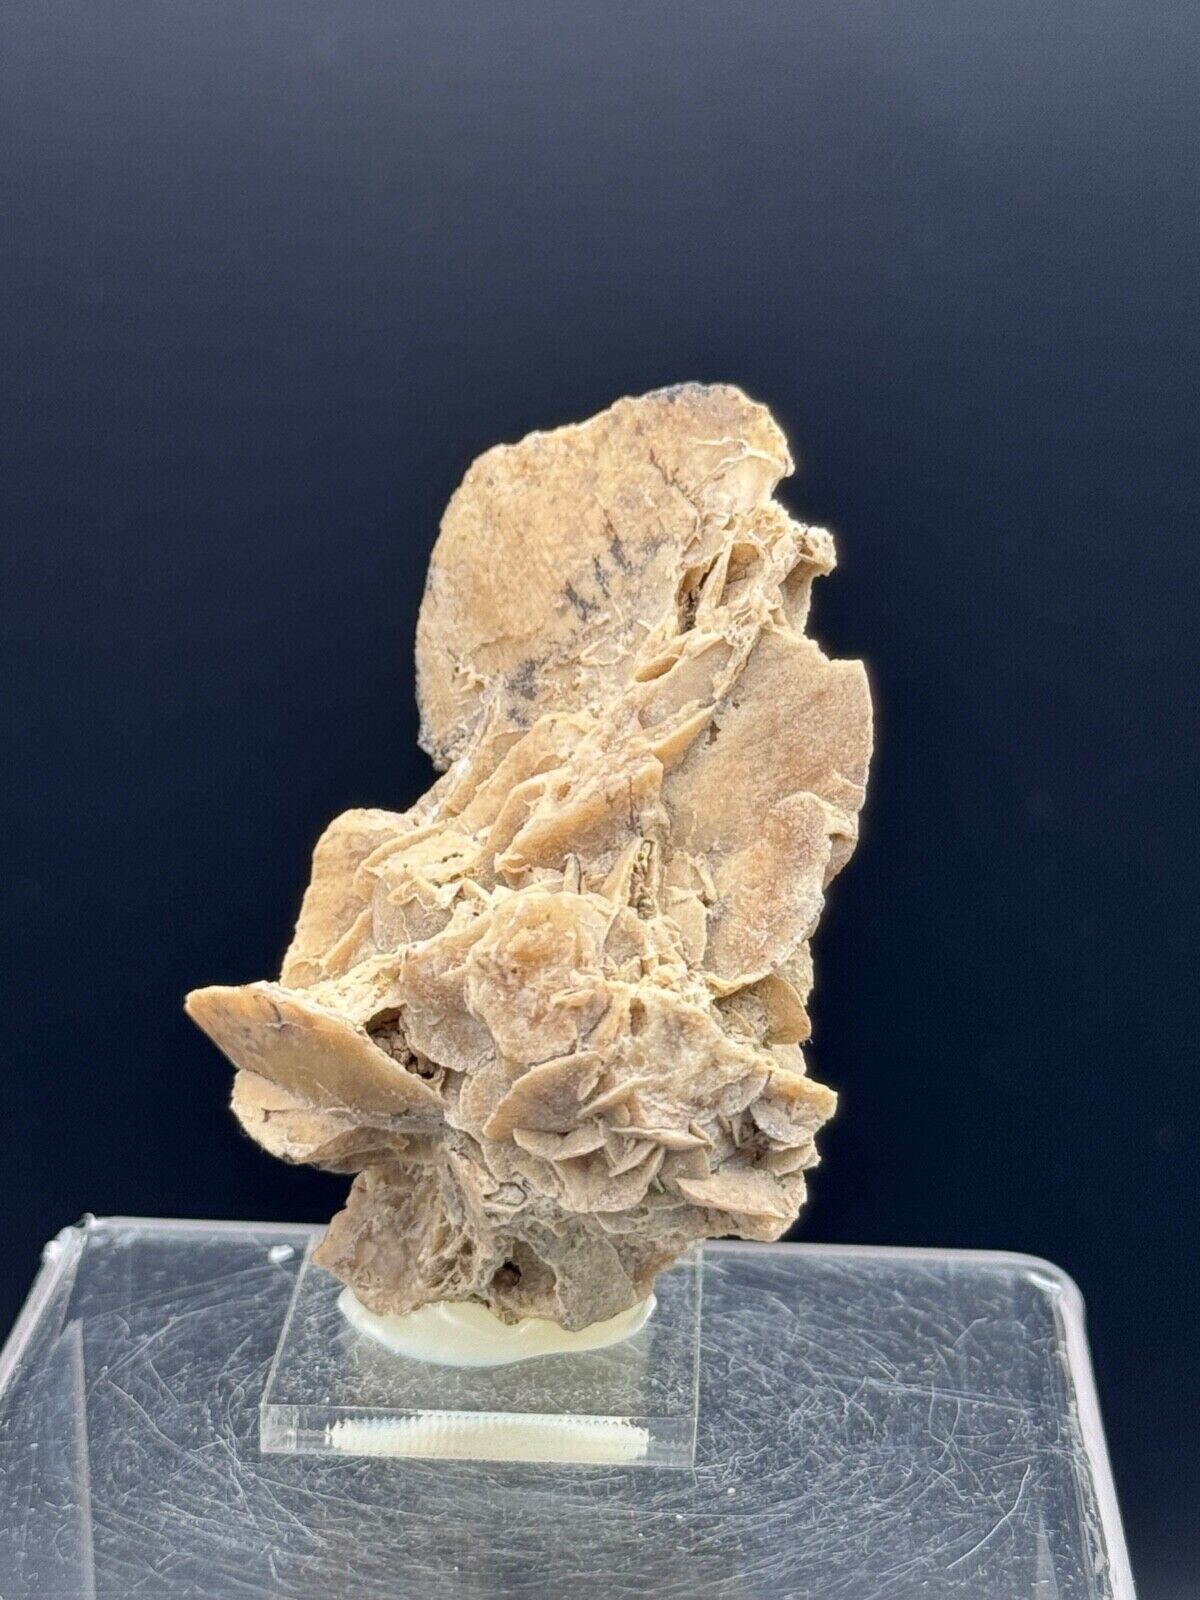 PSEUDOMORPHIC CALCITE FROM GYPSUM Valladolid SPAIN MINERALS COLLECTION 7x4x3cms